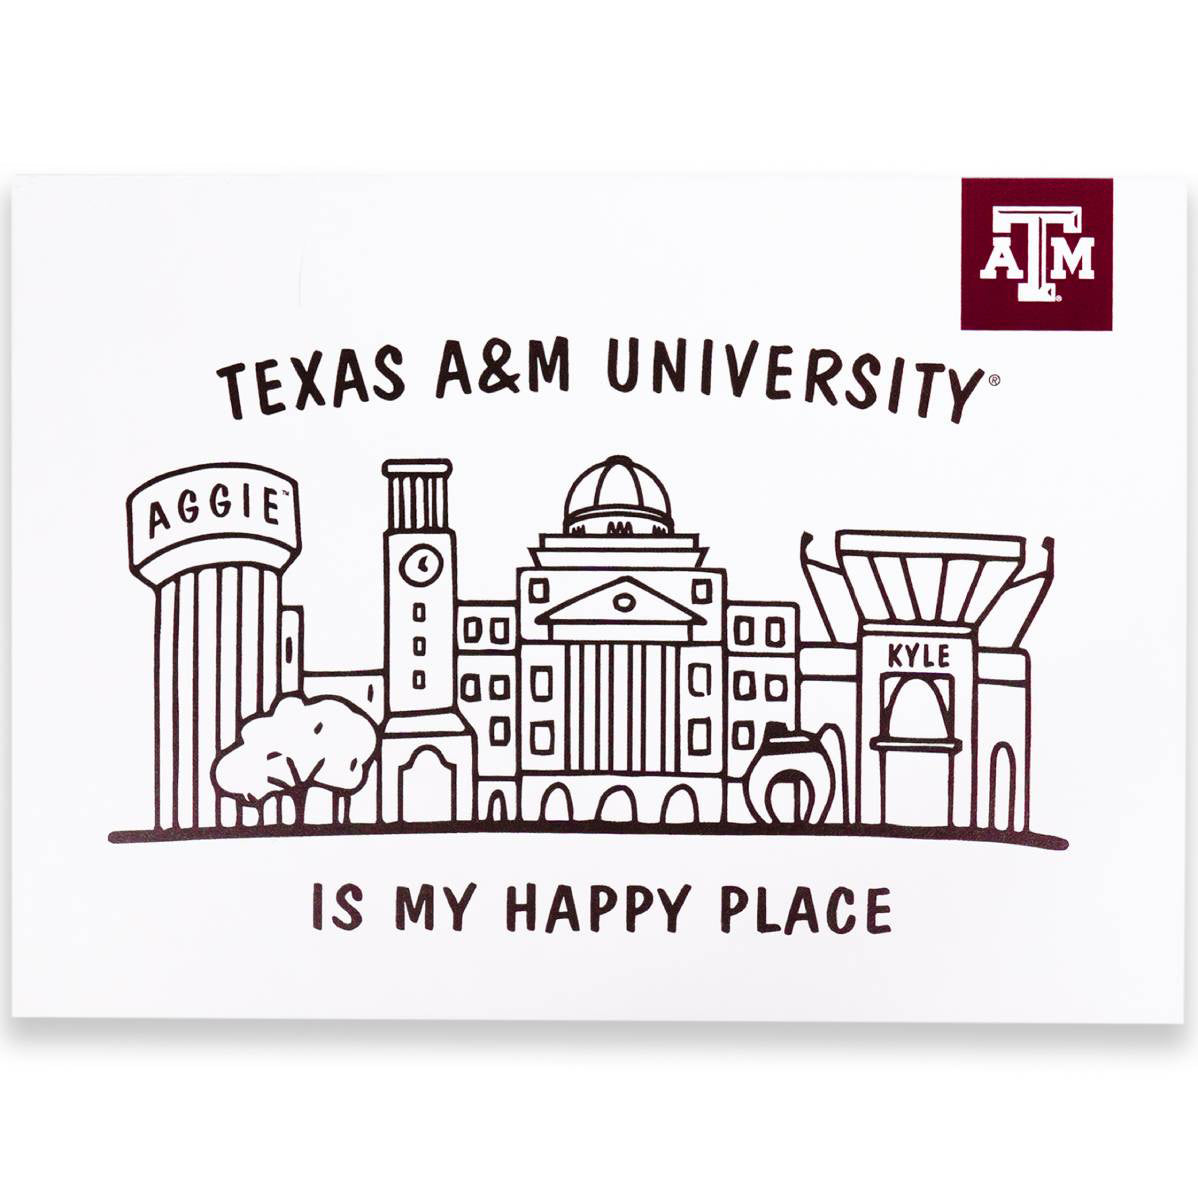 We're excited to introduce Reveille - Texas A&M University